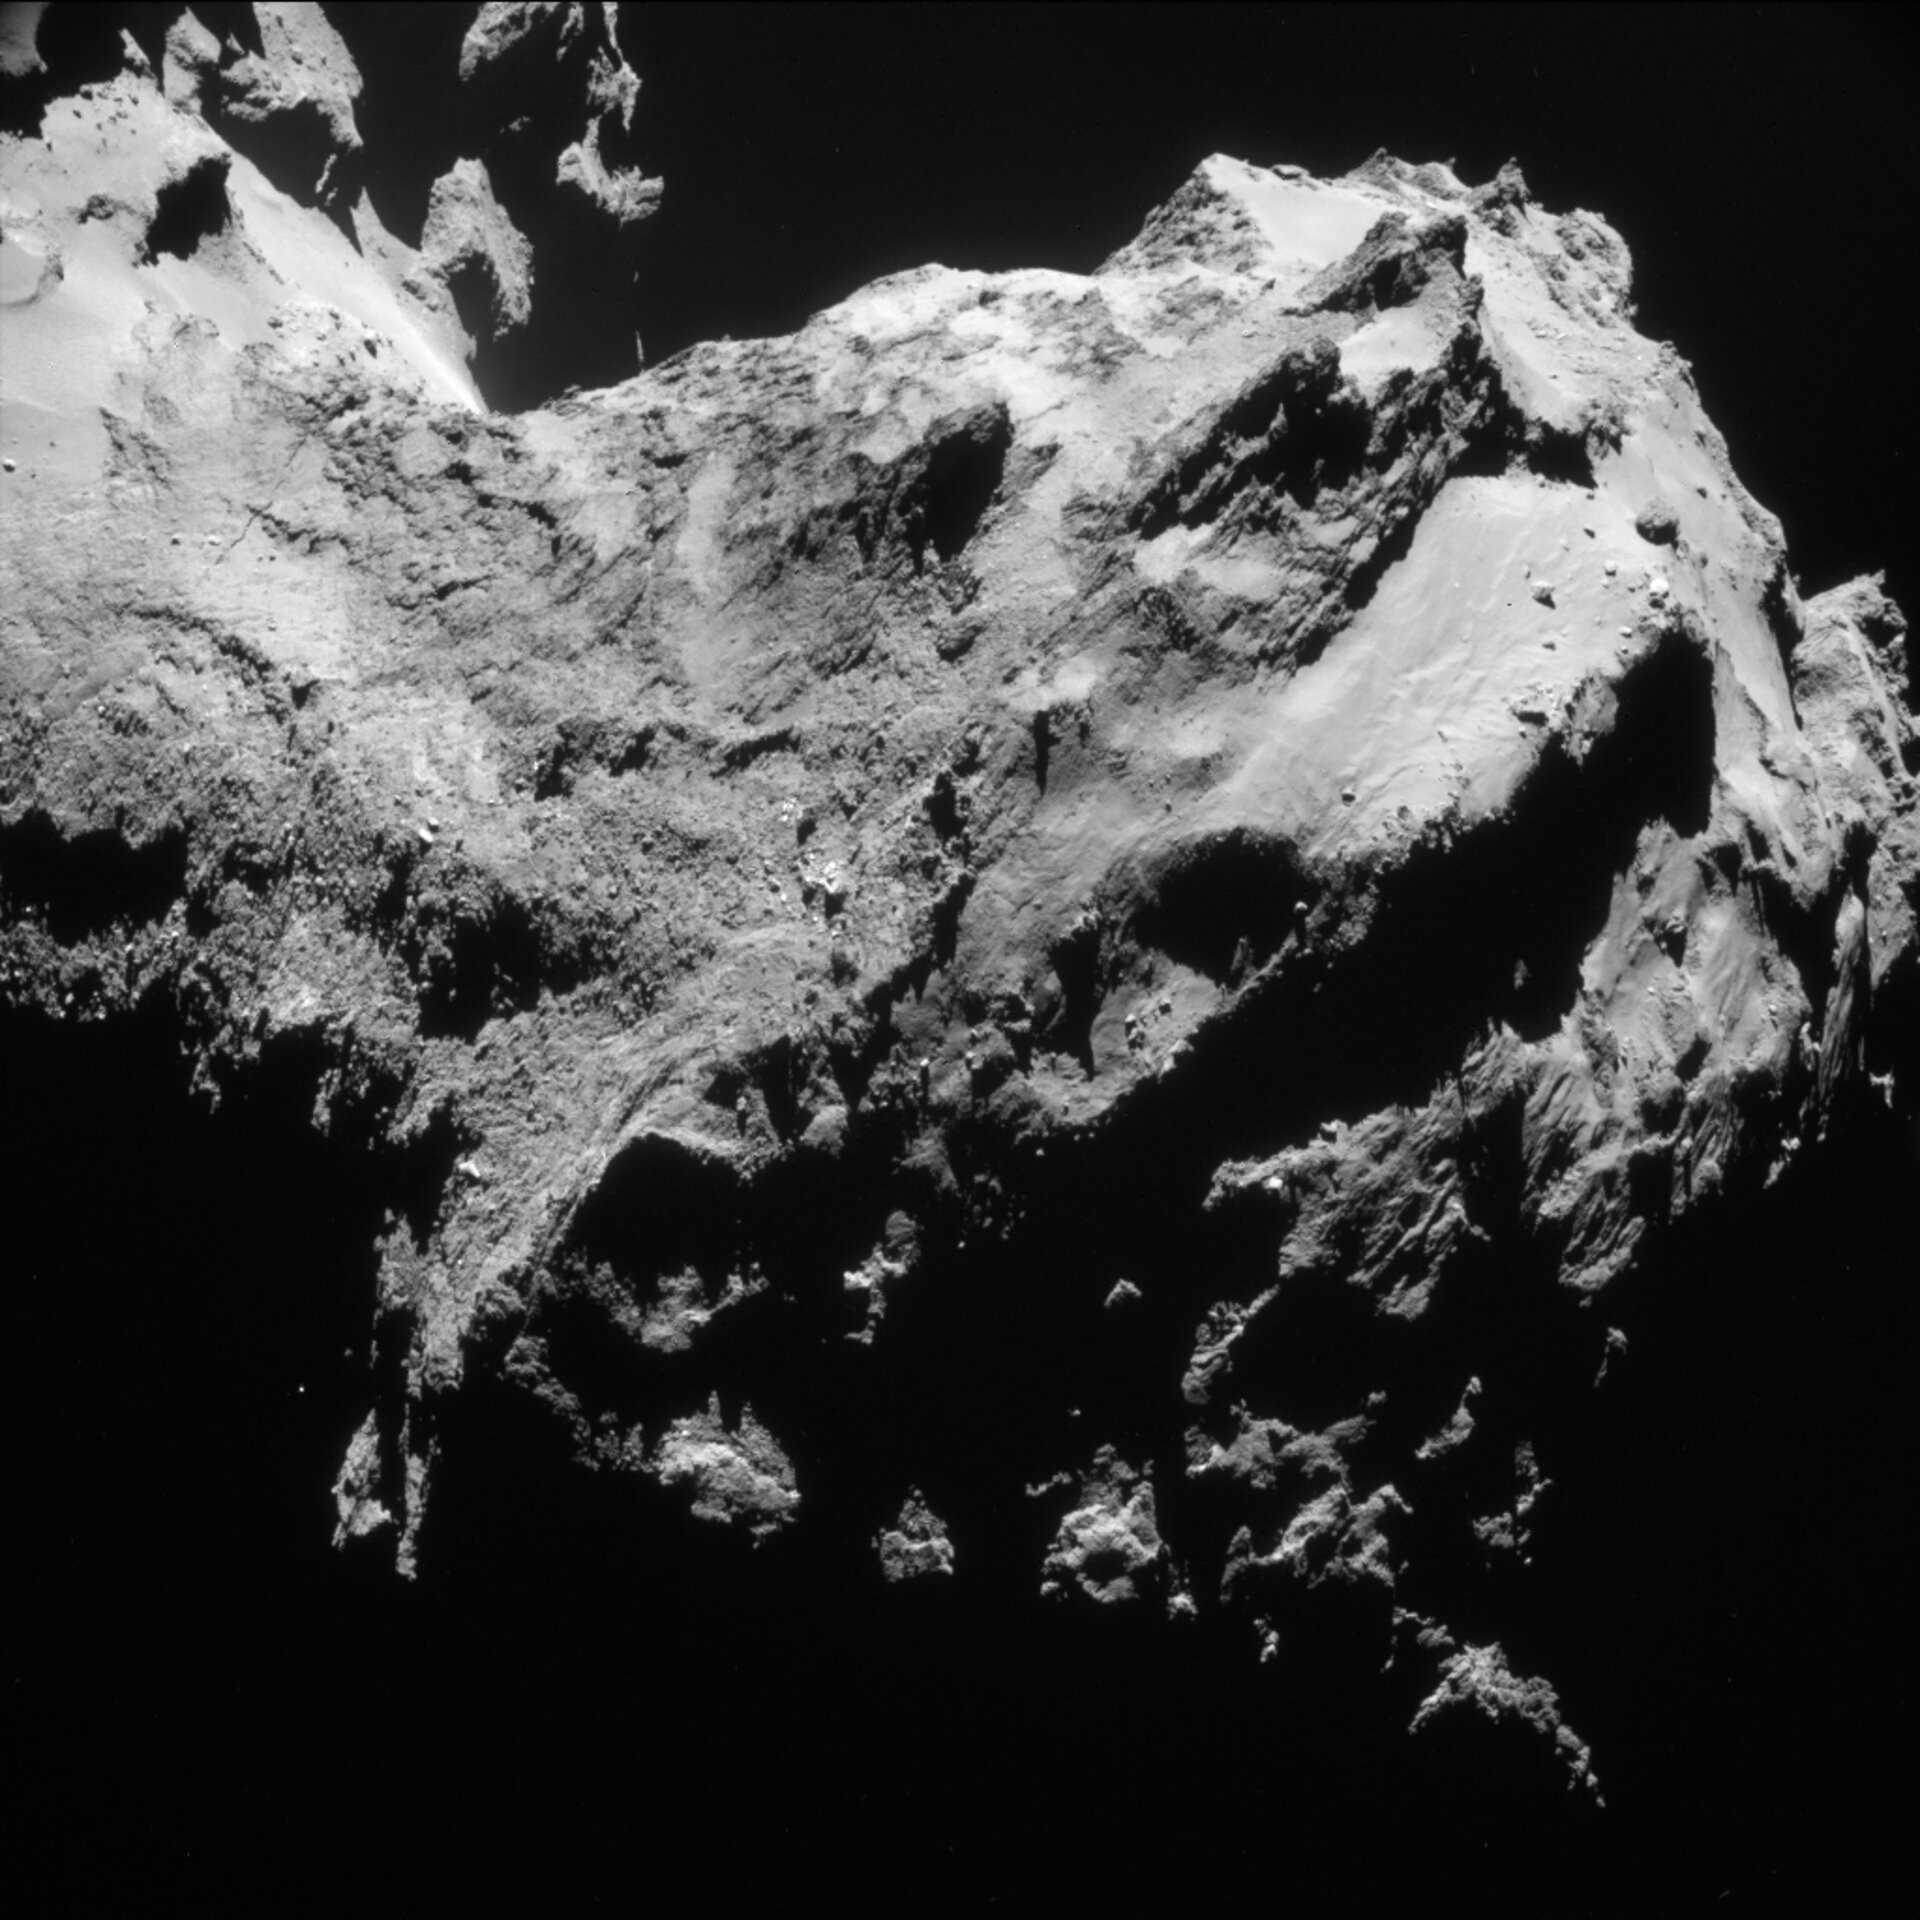 Year at a comet, September 2014